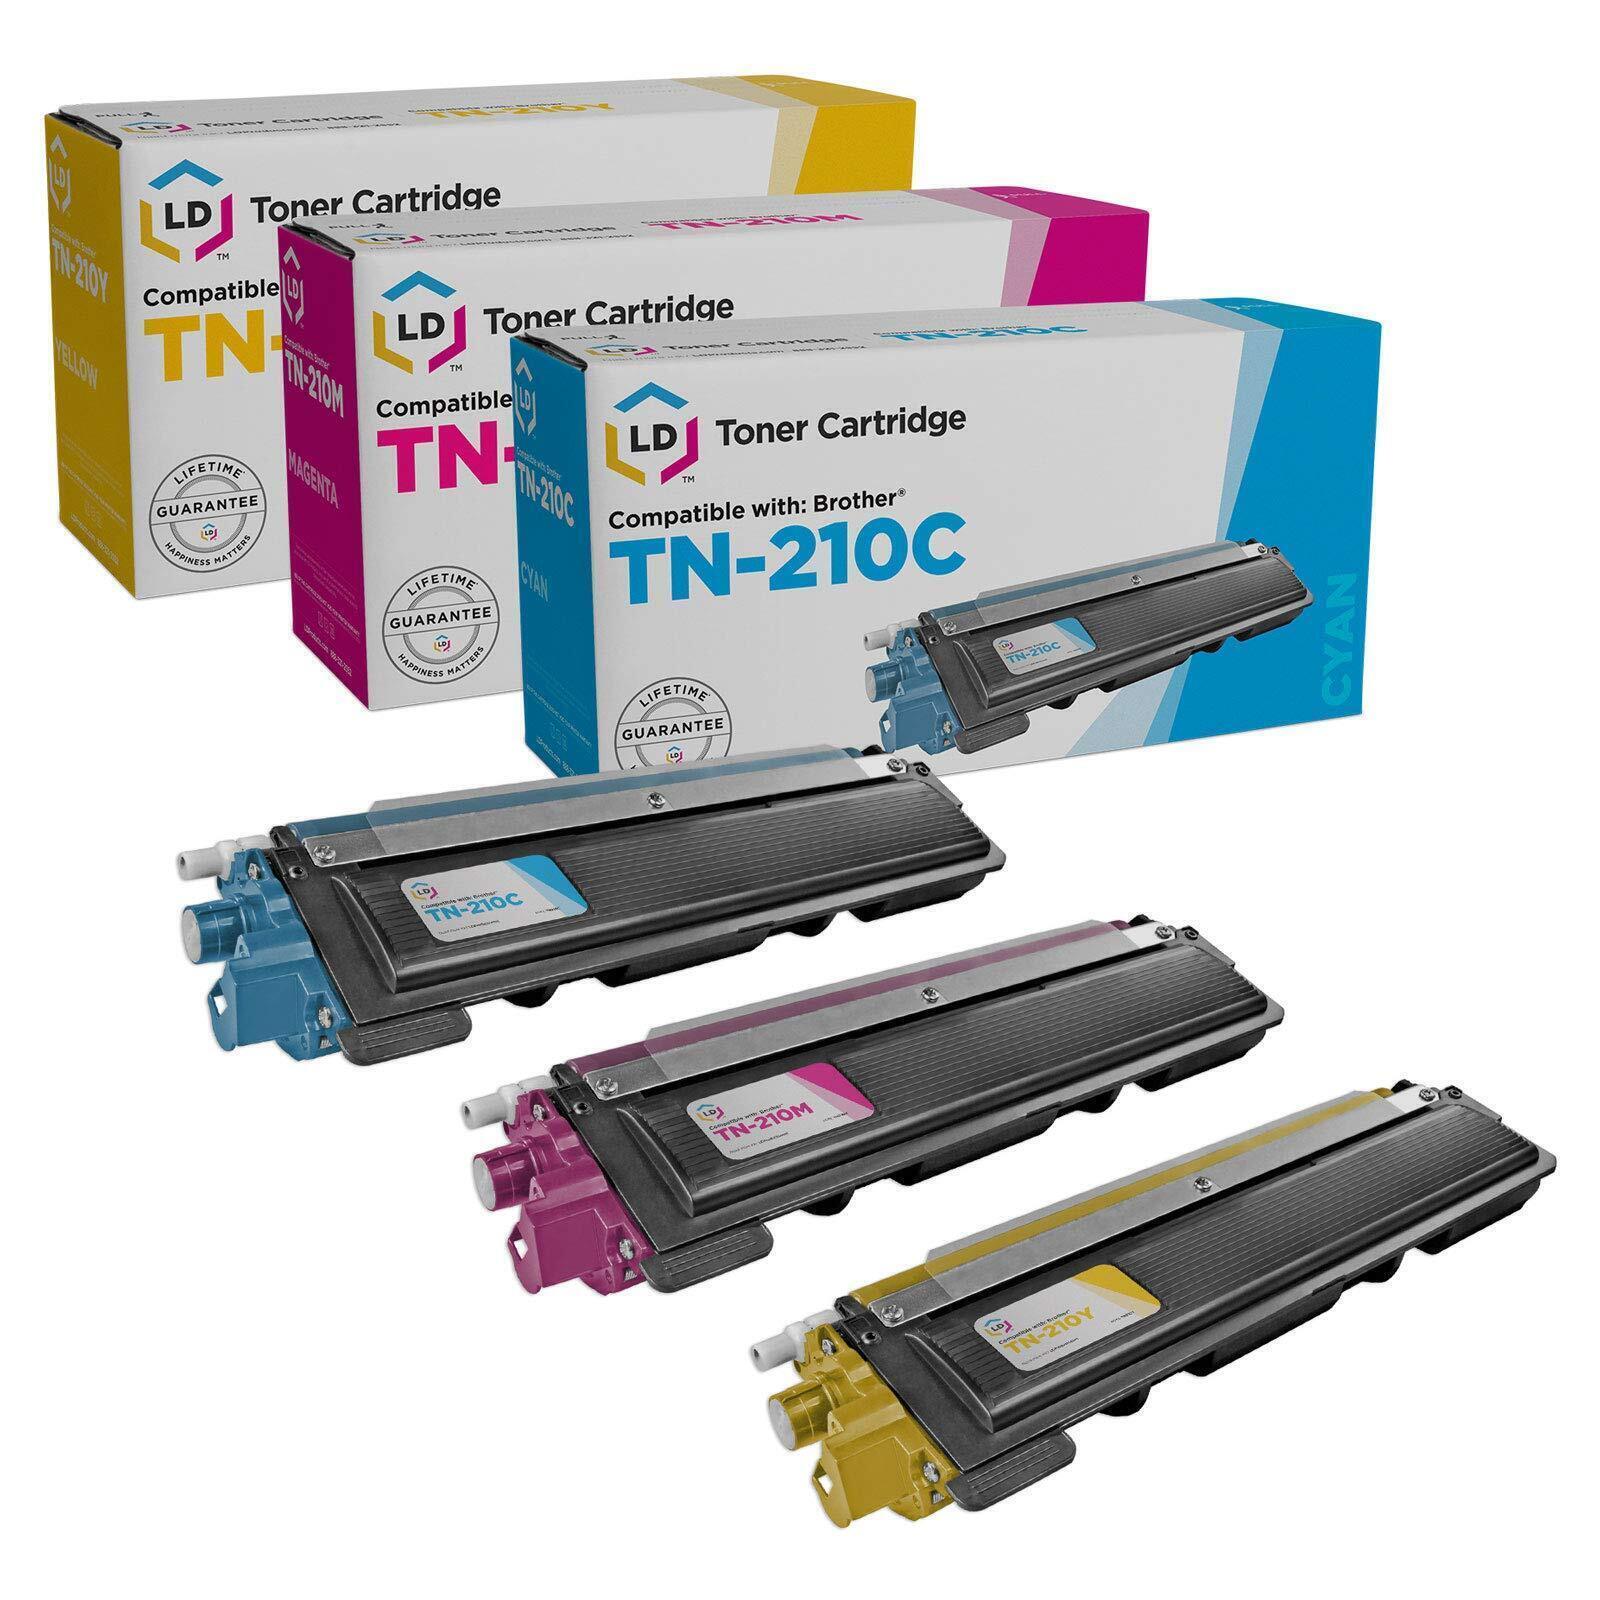 LD 3 Set TN210 Toners TN210C TN210M TN210Y for Brother MFC-9325 DCP-9010 HL-3040